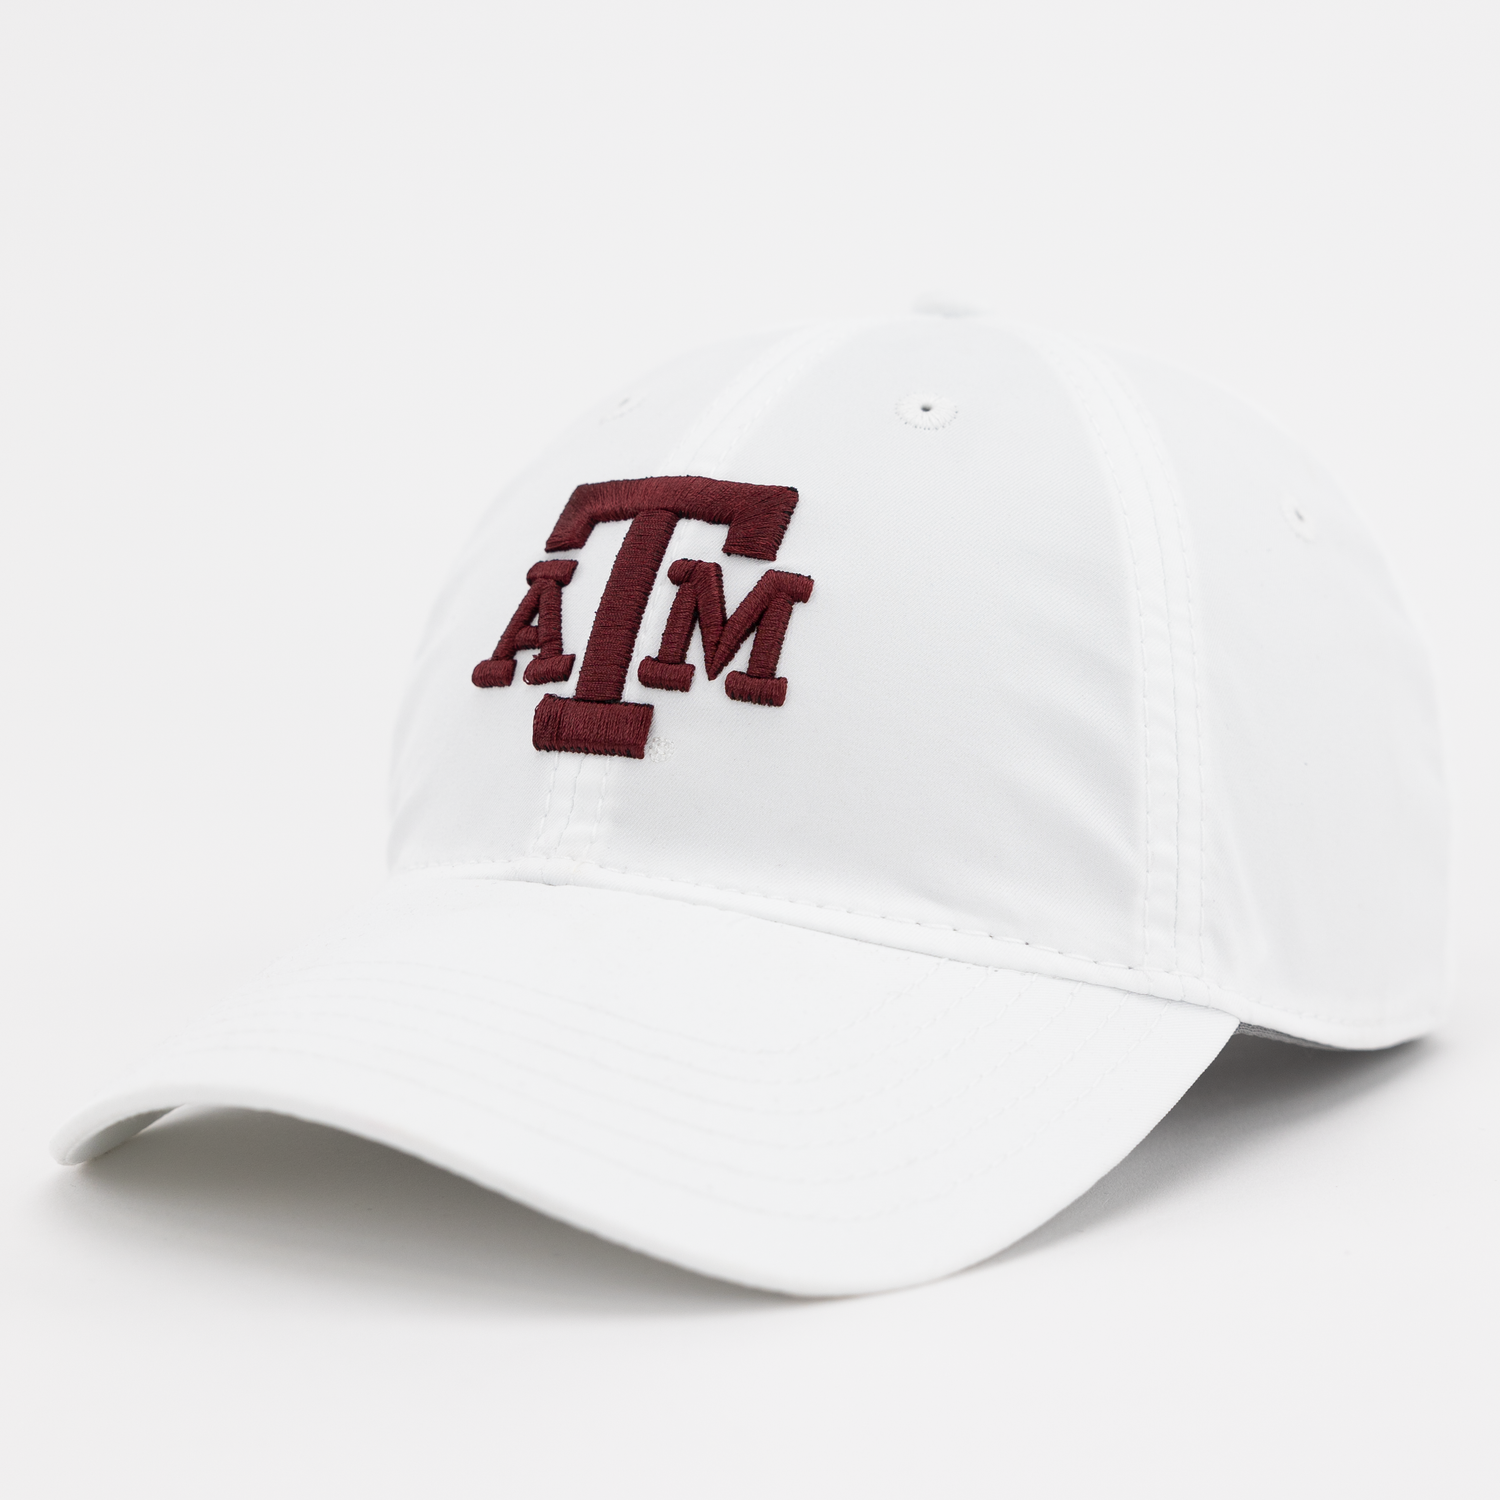 Texas A&M Cool Fit Structured Block Hat